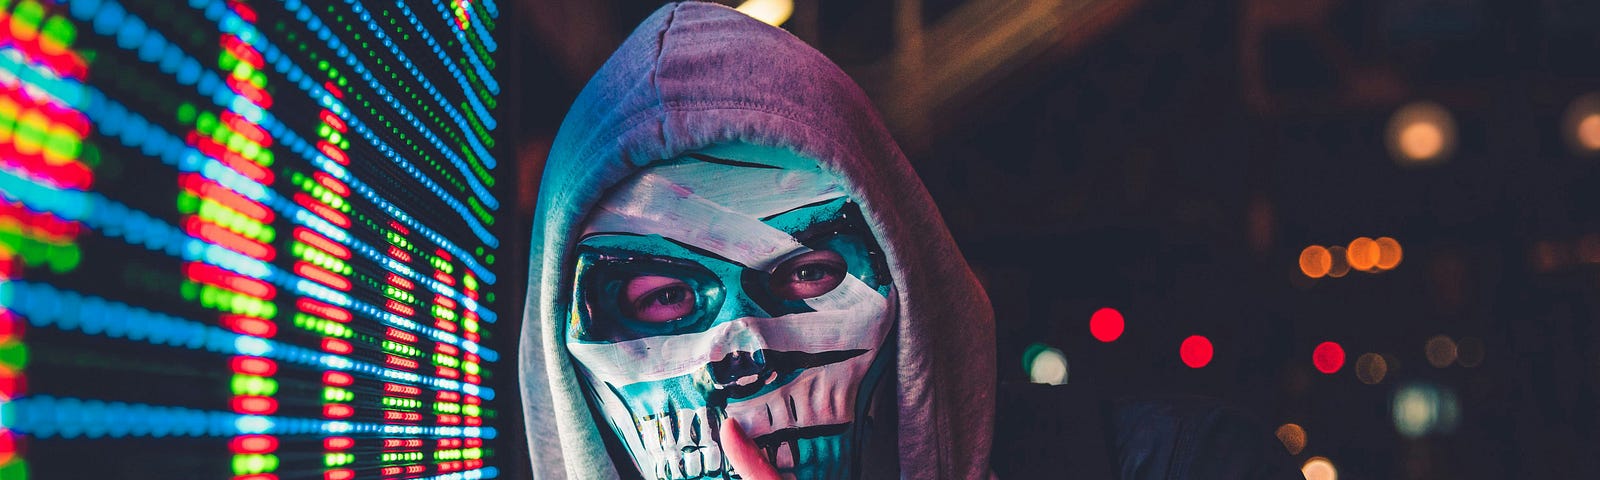 Man wearing scary mask with overly large teeth